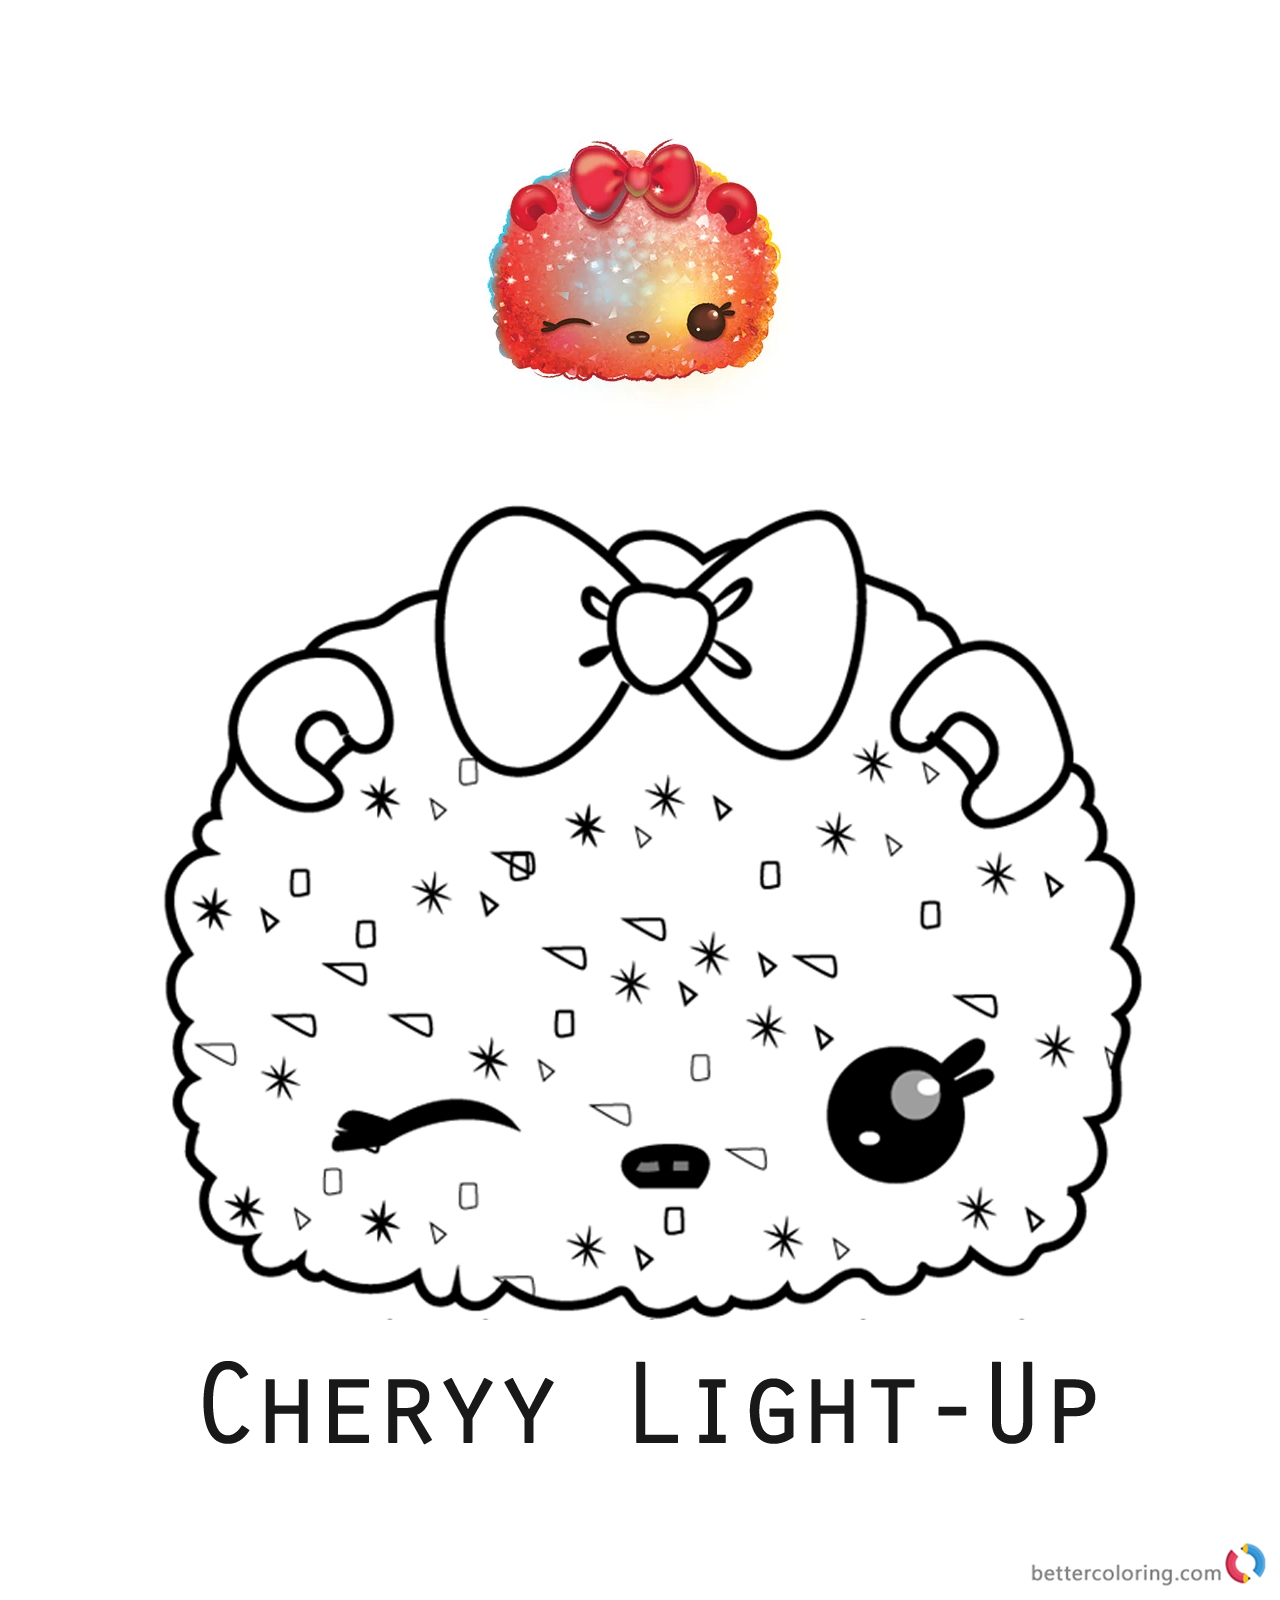 Cherry Light-Up from Num Noms coloring pages printable